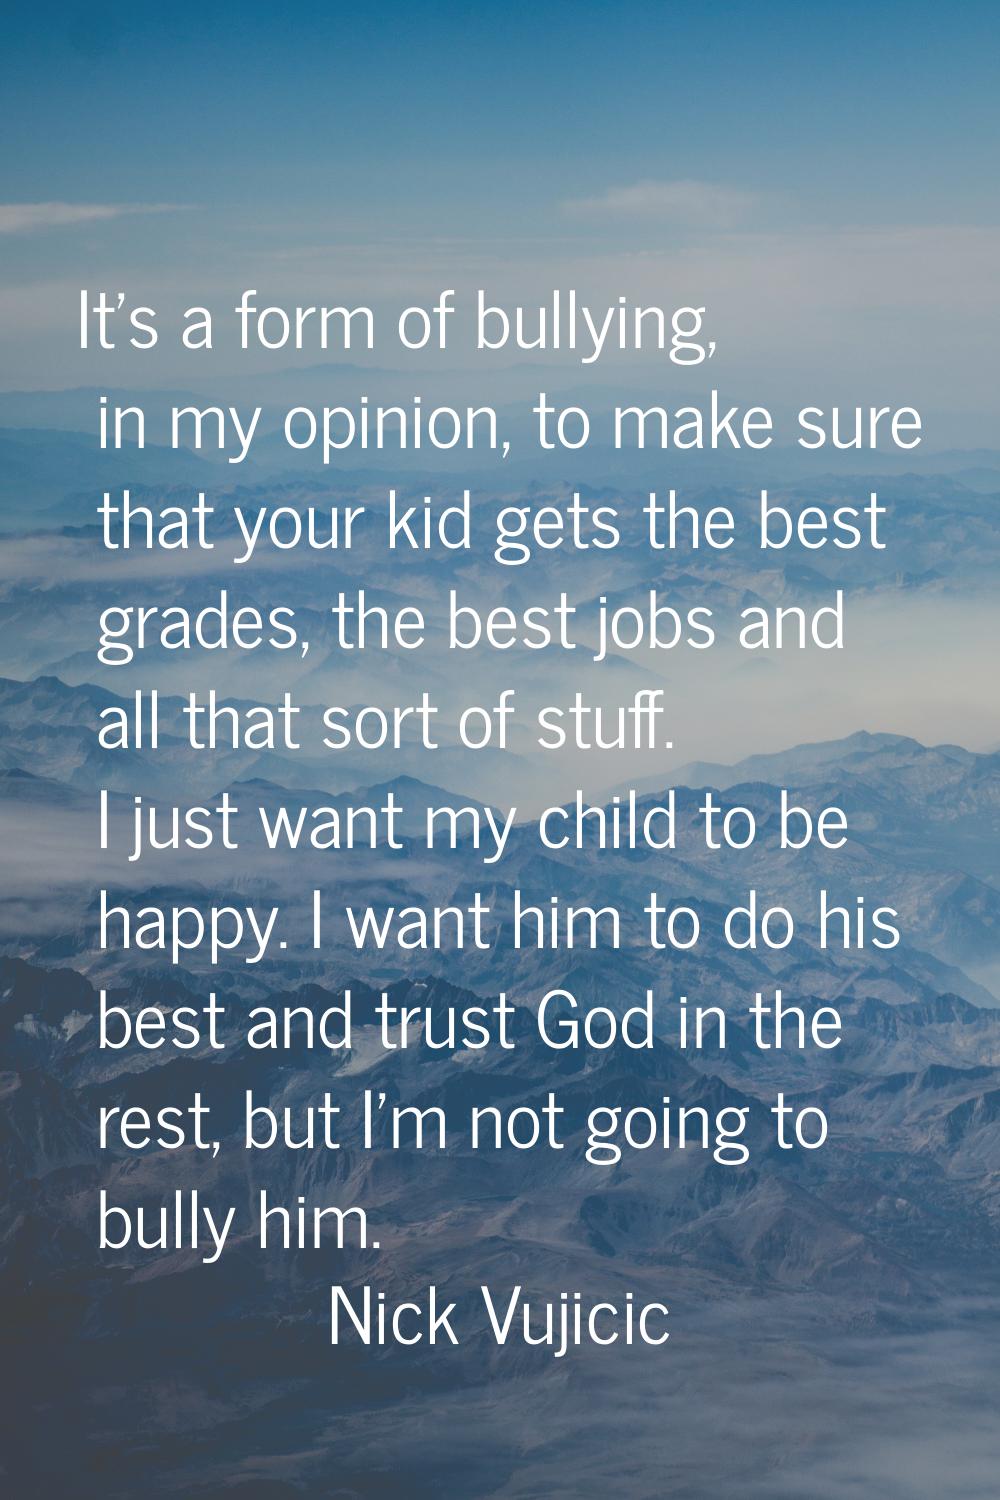 It's a form of bullying, in my opinion, to make sure that your kid gets the best grades, the best j